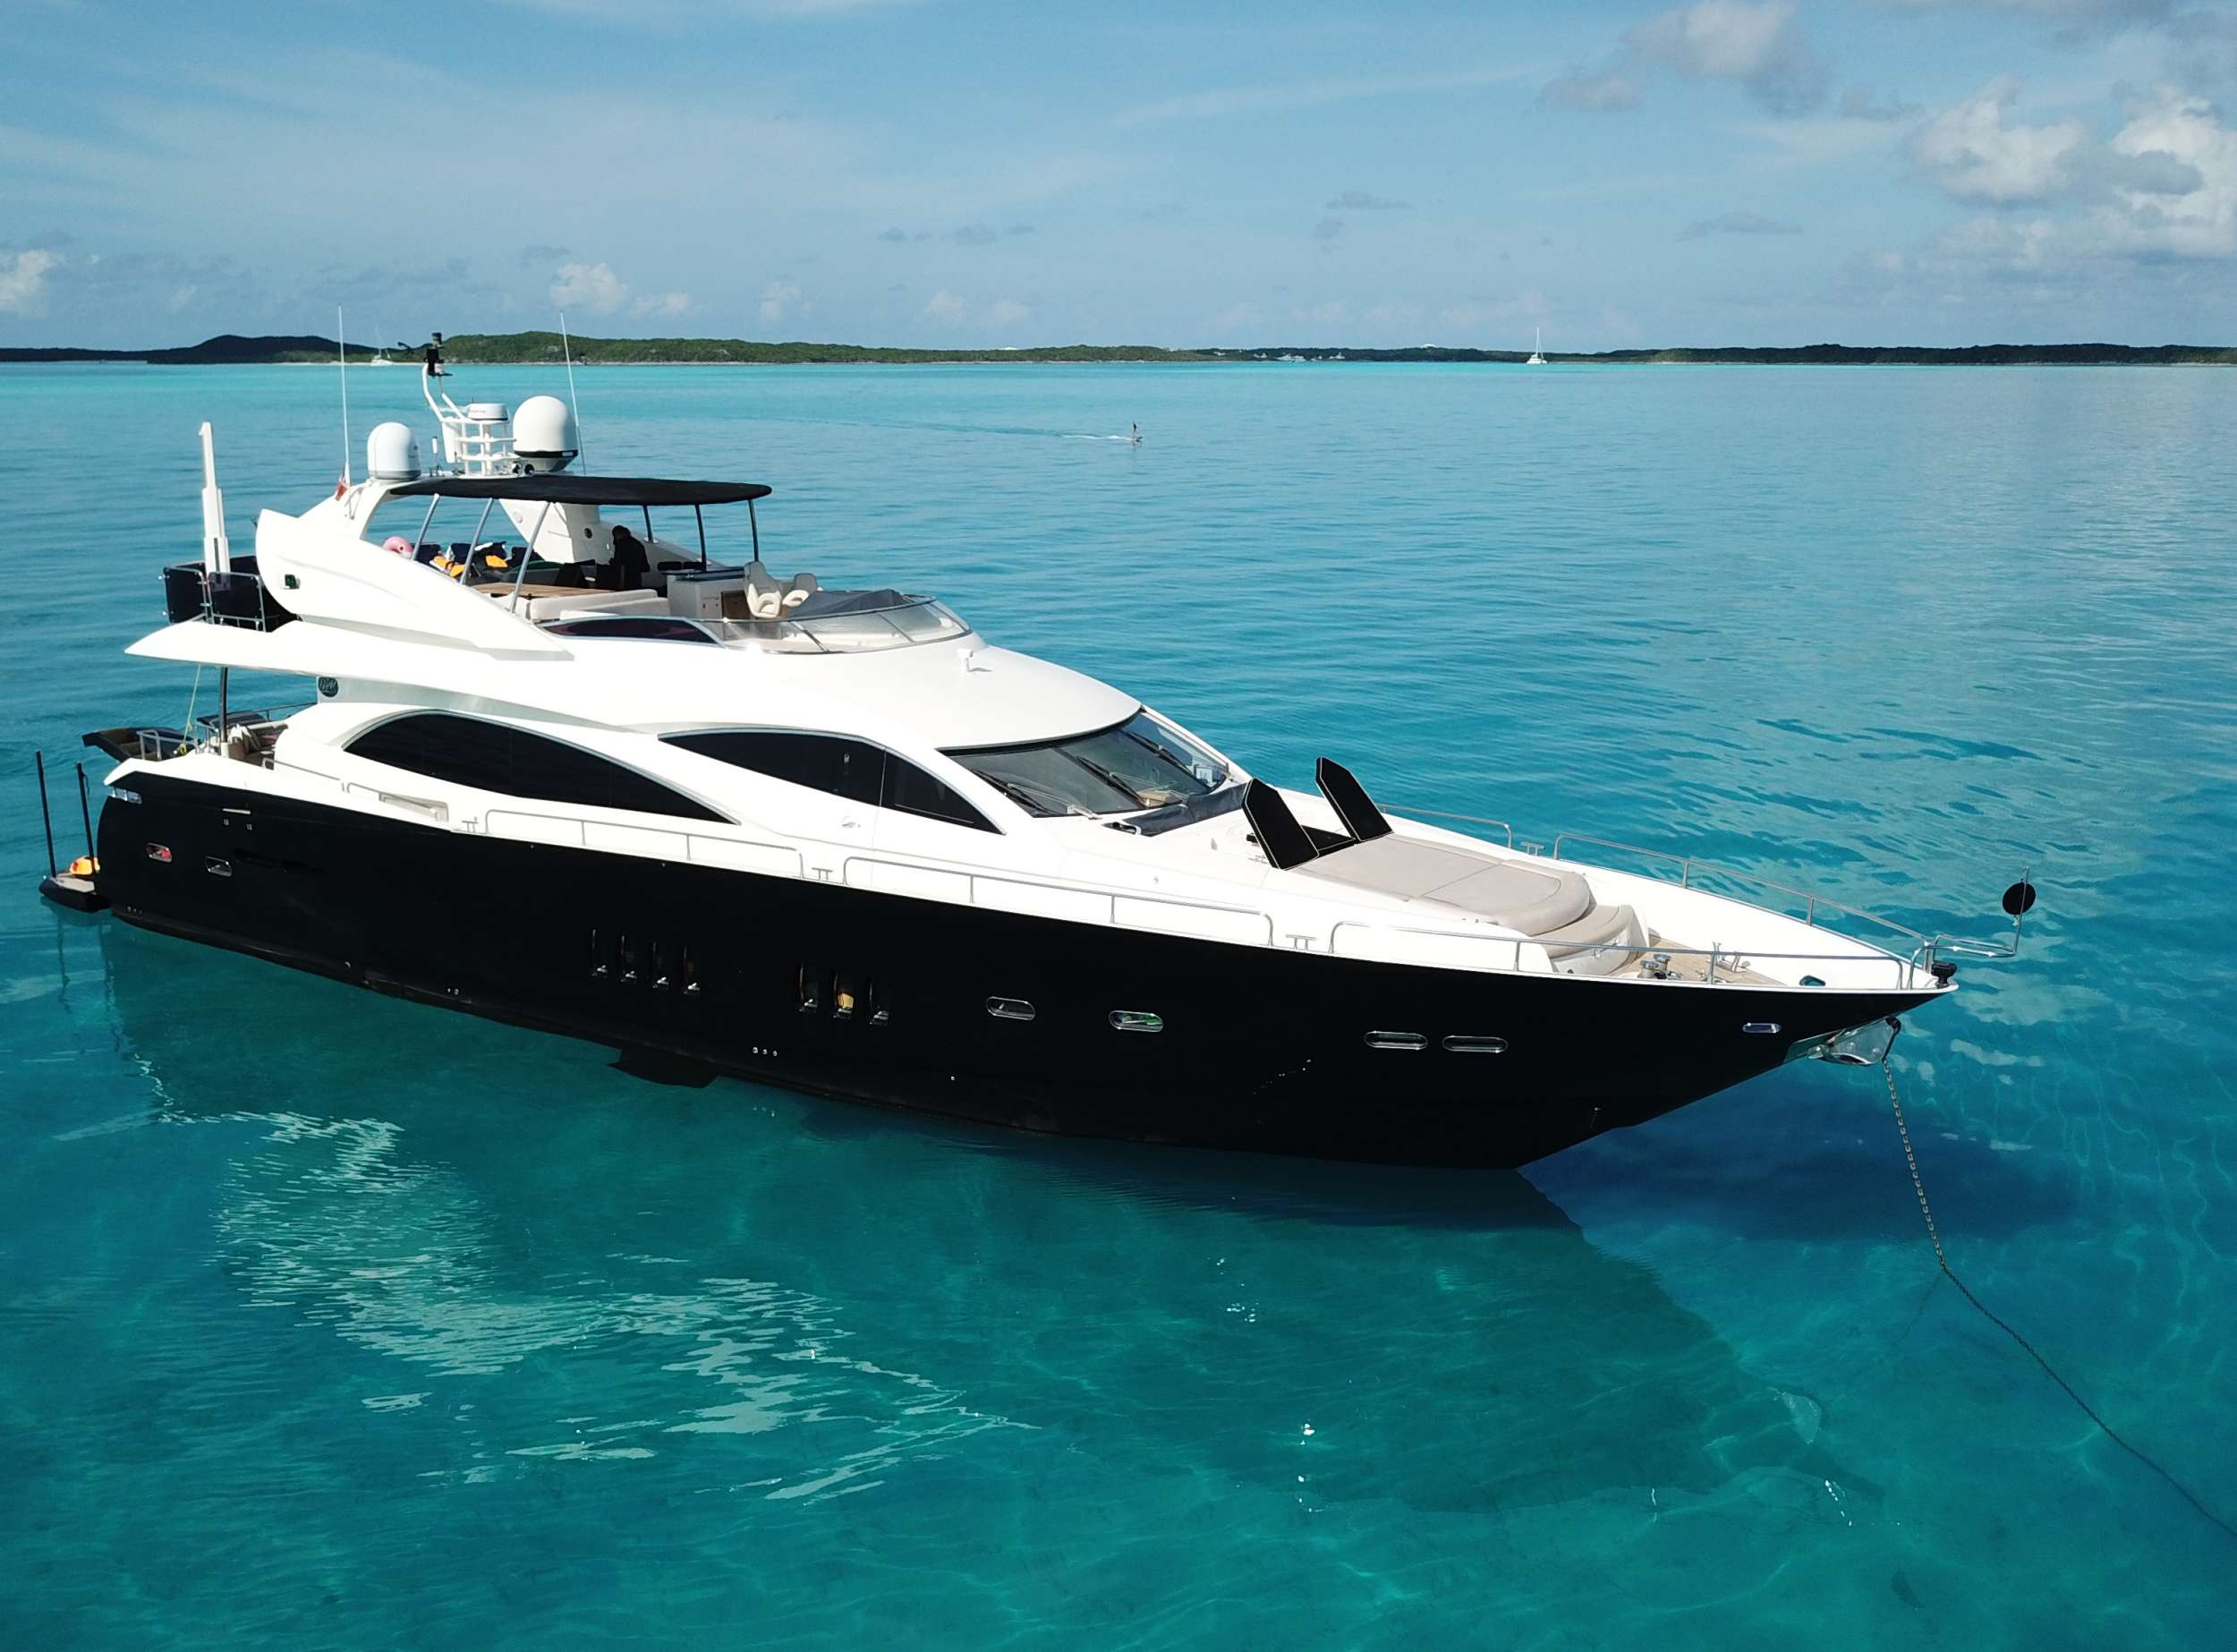 M/Y CATALANA was designed specifically with safety as a priority. While she still has the sleek and stylish feel of a Sunseeker and is capable of speeds up to 30 knots, this flybridge motor yacht has many safety features discretely added throughout, guaranteeing peace of mind at all times. Built in 2007 and comprehensively refitted in 2018, CATALANA is a modern yacht for charter, well suited to groups of any age to cruise around the Bahamas in style.

On deck, the spacious fly bridge provides more than enough room for a relaxed seating area along with a wet bar and plenty of space for lounging in the sun. Her resourceful storage arrangement provides easy access to the tender, as well as allowing for plenty of onboard toys to be ready for entertaining. CATALANA&rsquo;s large bathing platform can be lowered up to 1m below water level providing easy access straight into the water.

The attractive wooden flooring in the salon and dining areas gives the yacht a cool, spacious and elegant feel. The tasteful and modern d&eacute;cor throughout the yacht provides an elegant setting whether for dining or lounging, and includes a state of the art entertainment system. Outside on the aft deck, a large table provides comfortable alfresco dining for up to ten people and the enlarged galley with extra storage facilities enables the chef to easily cater for groups of this size and more. Below decks, CATALANA&rsquo;s versatile cabin arrangements can accommodate up to 10 guests in 4 cabins or a combination of twins and doubles, each with en-suite bathrooms. All cabins are stylishly decorated in neutral tones, and each has its own TV and entertainment system creating a natural environment for relaxing. Both guests cabins also have Pullman berths, perfect for young children.